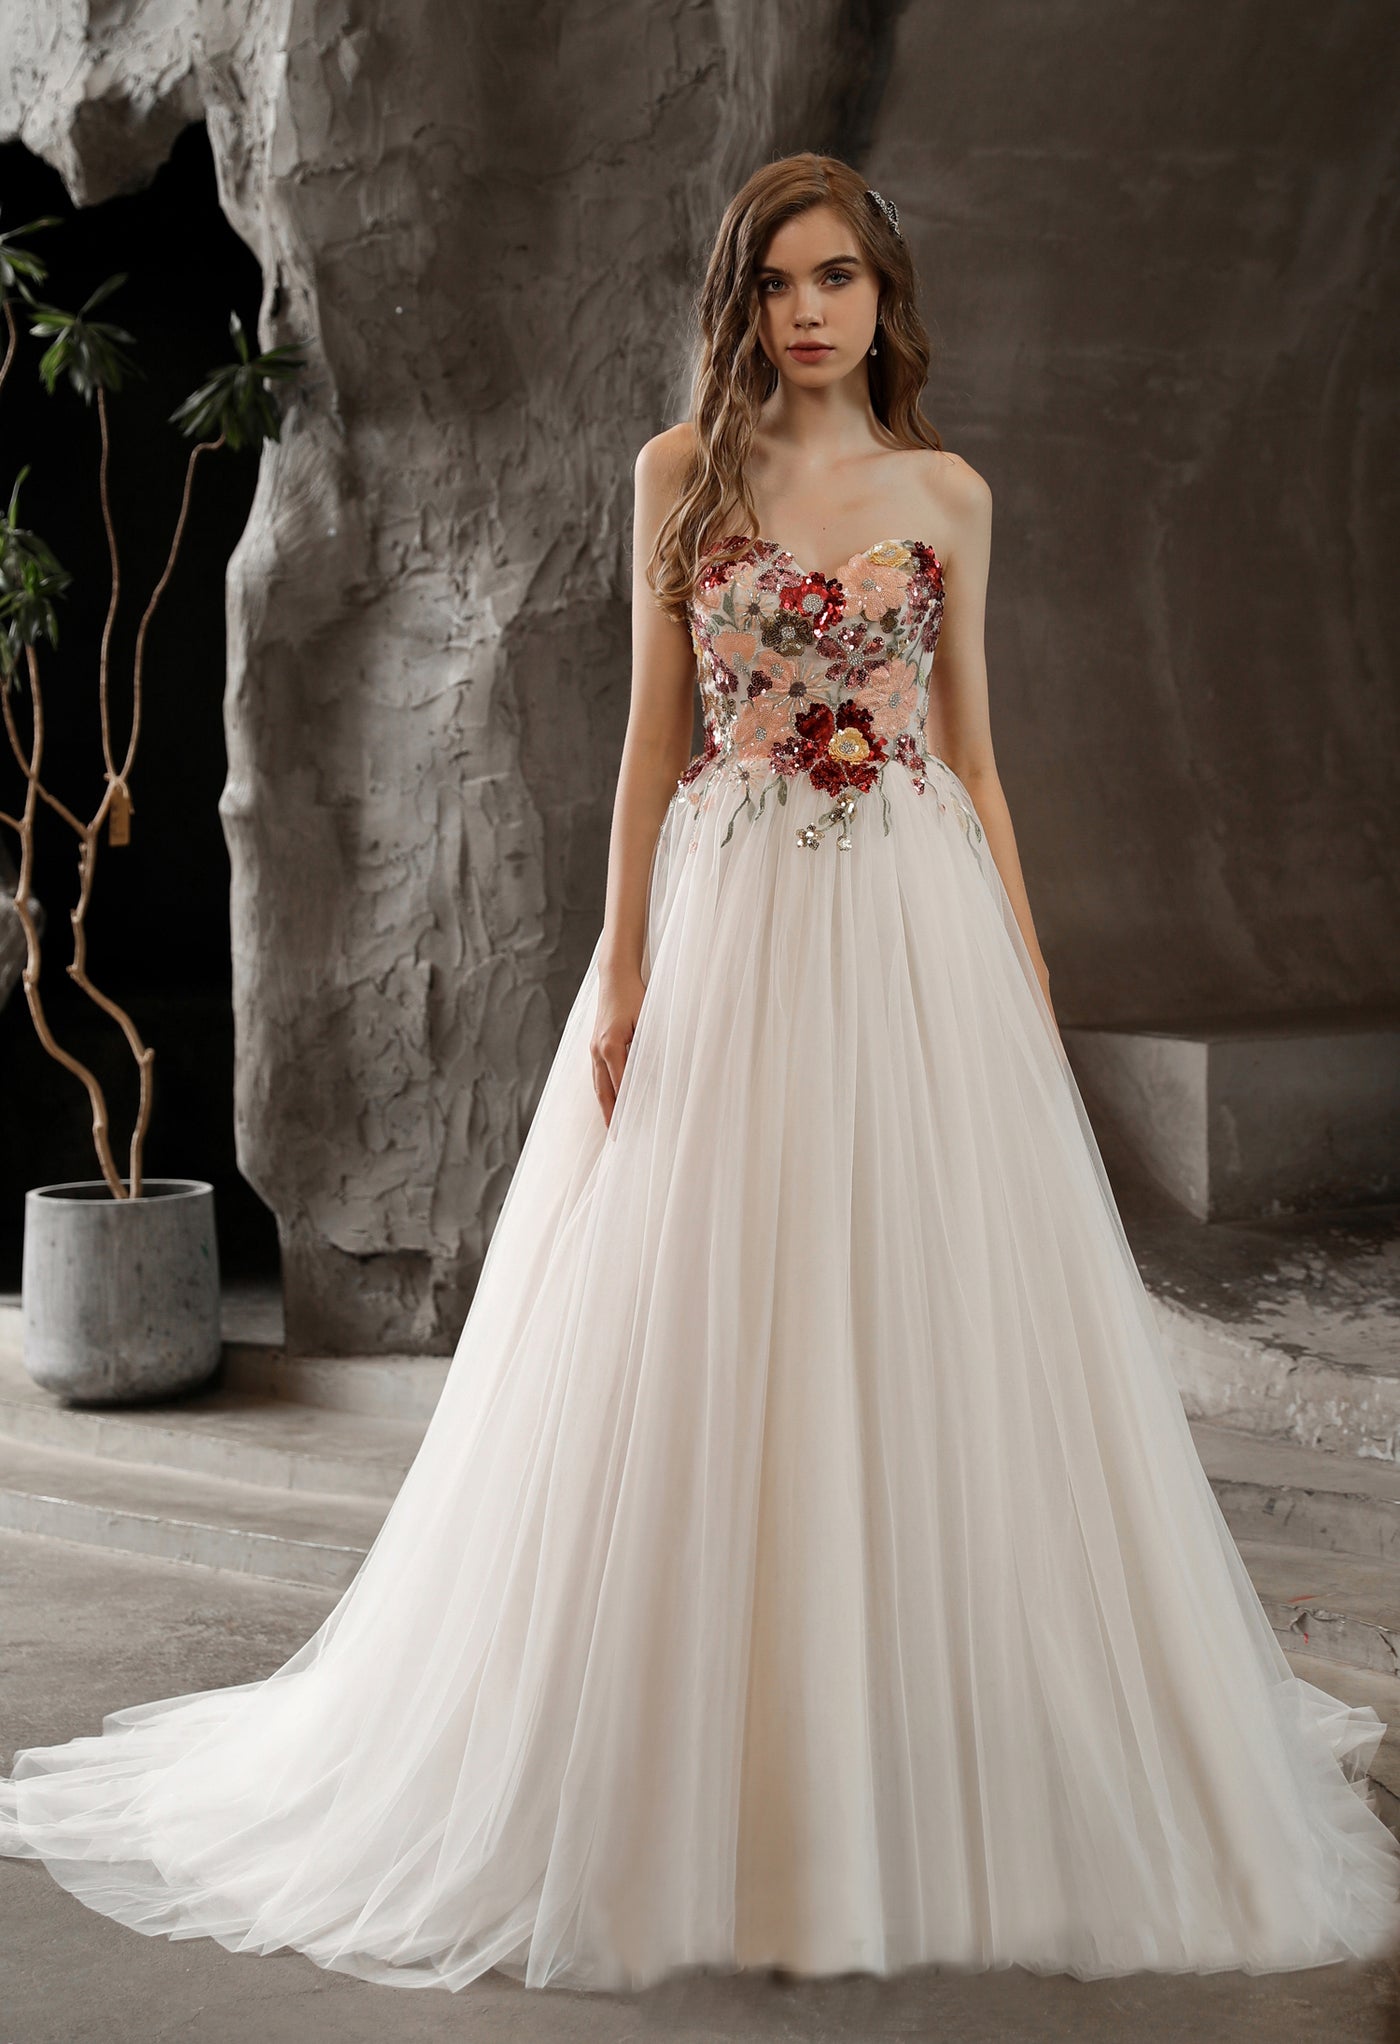 A beautiful Strapless Princess A-line bridal gown with tulle skirt and floral beaded bodice can be found at Bergamot Bridal shops in London.